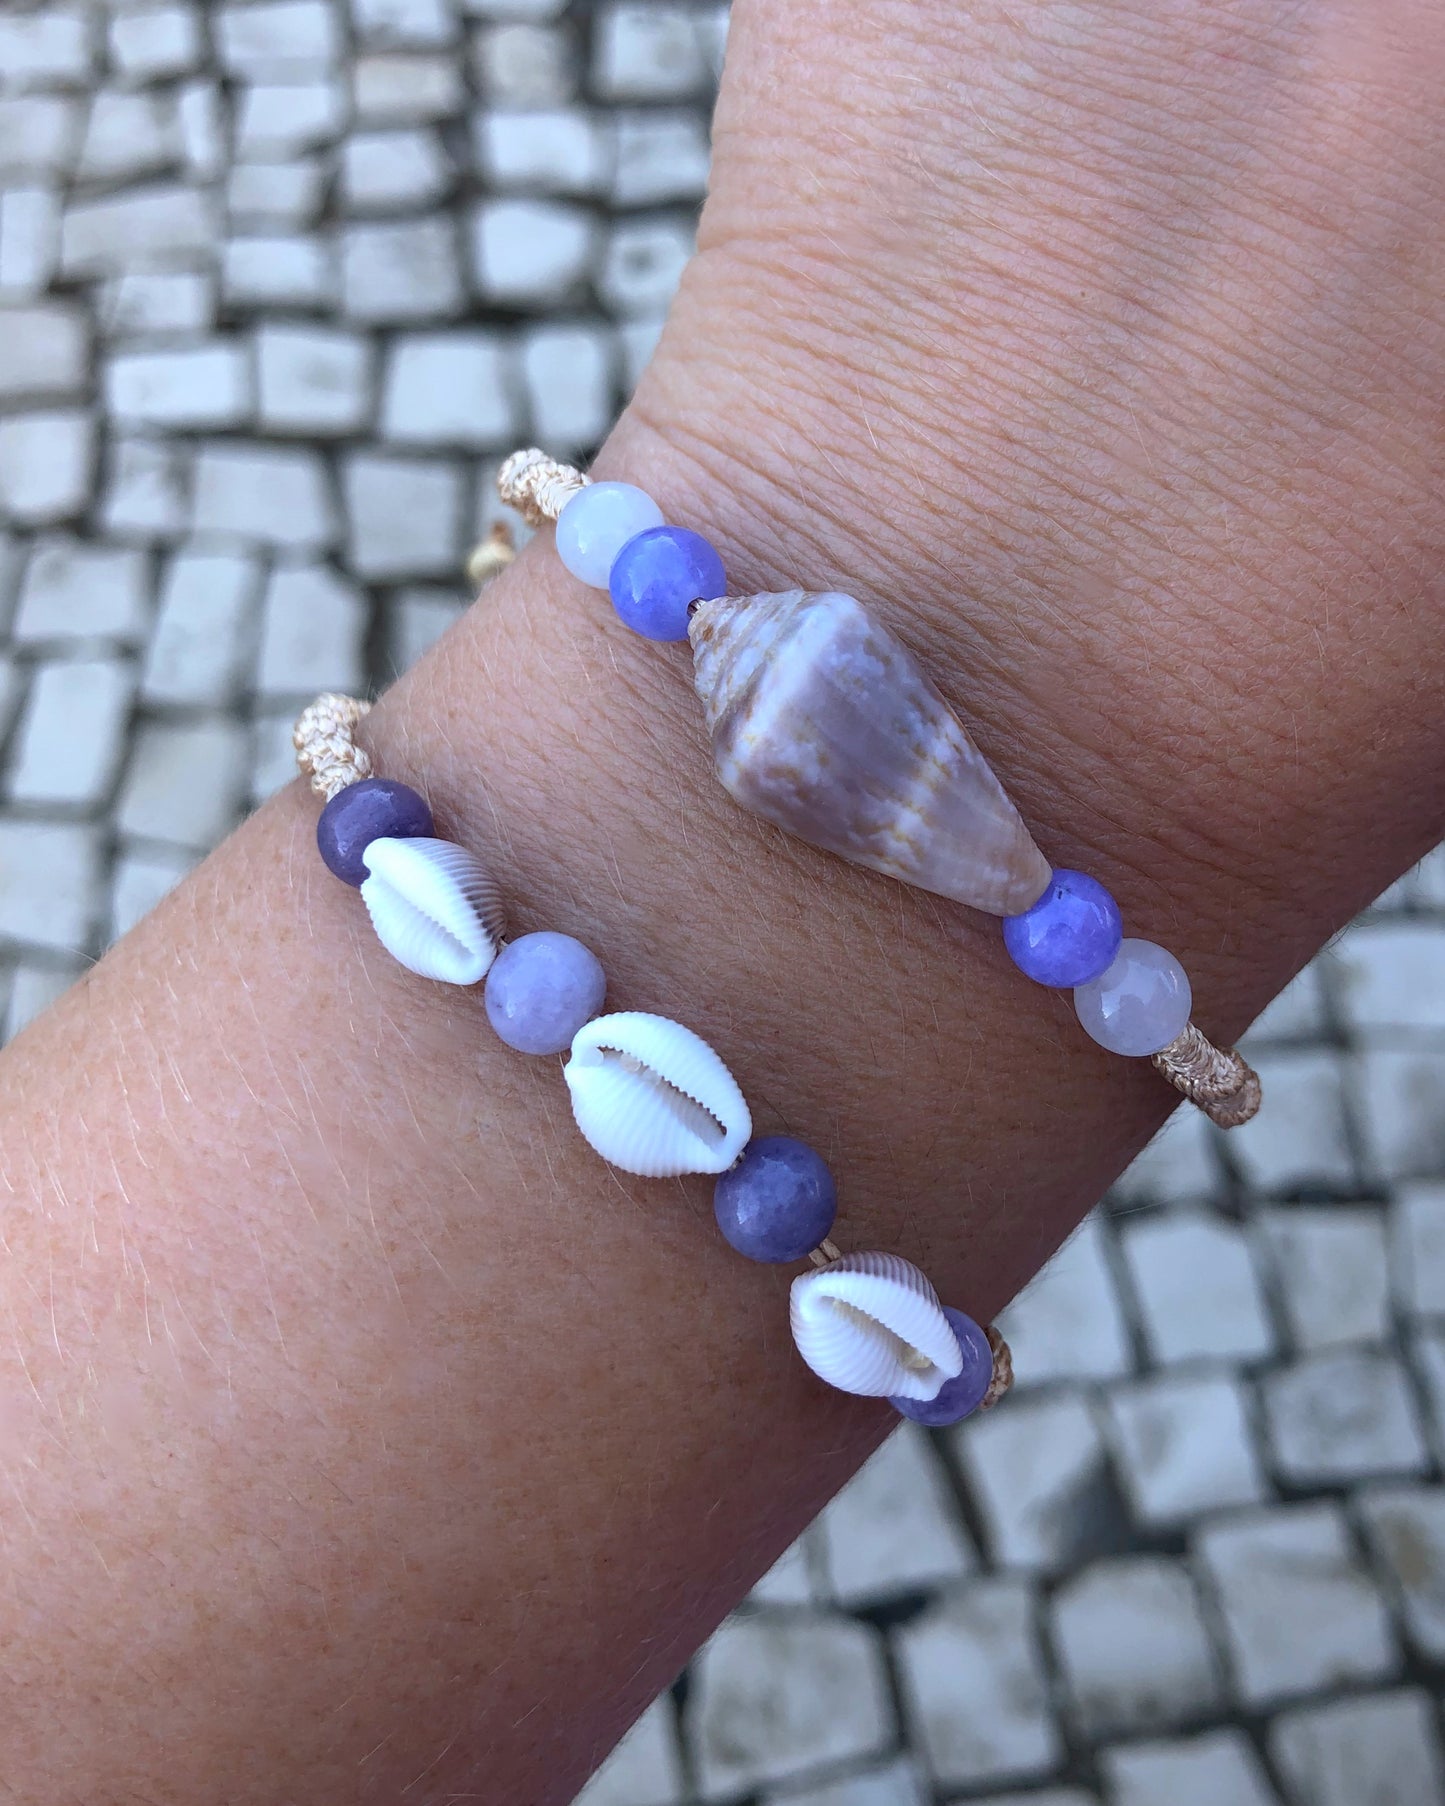 Portuguese Cowrie Shells Bracelet, and Amethyst Beads, sea by lou, Bohemian Beach Girl Jewelry, Cone Shell Algarve